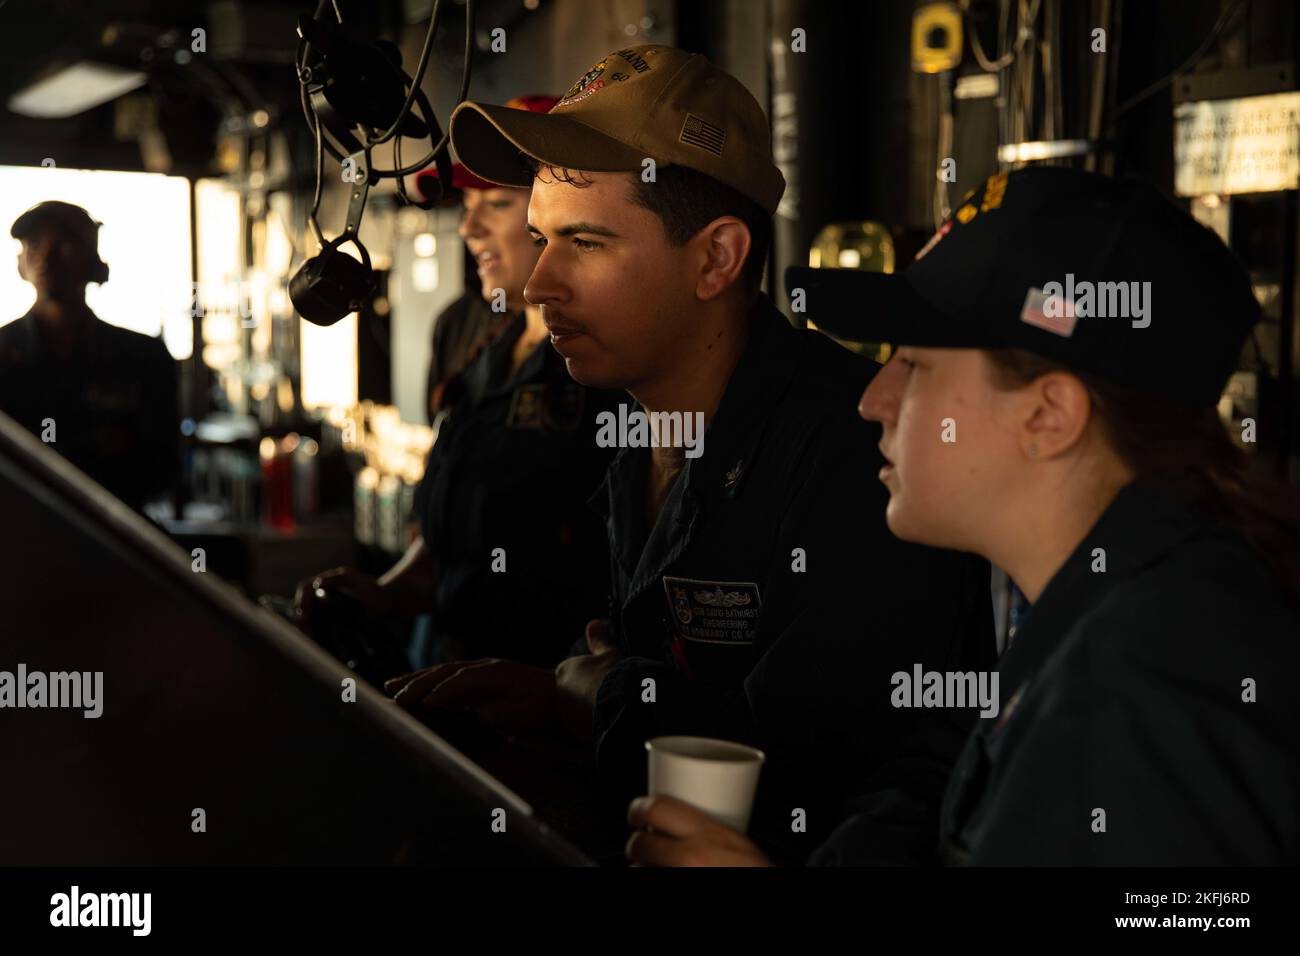 220918-N-LK647-0090 ATLANTIC OCEAN (Sept. 18, 2022) Gas Turbine Systems Technician (Electrical) 3rd Class Javier Fonseca-Diaz, center, and Gas Turbine Systems Technician (Electrical) 3rd Class Abby Howard stand watch on the bridge of the Ticonderoga-class guided-missile cruiser USS Normandy (CG 60) as part of a replenishment-at-sea with the Henry J. Kaiser-class oiler John Lenthall (T-AO-189) during Surface Warfare Advanced Tactical Training (SWATT). Normandy is underway as part of the Gerald R. Ford Carrier Strike Group conducting SWATT exercises to increase lethality, ensure combat readiness Stock Photo